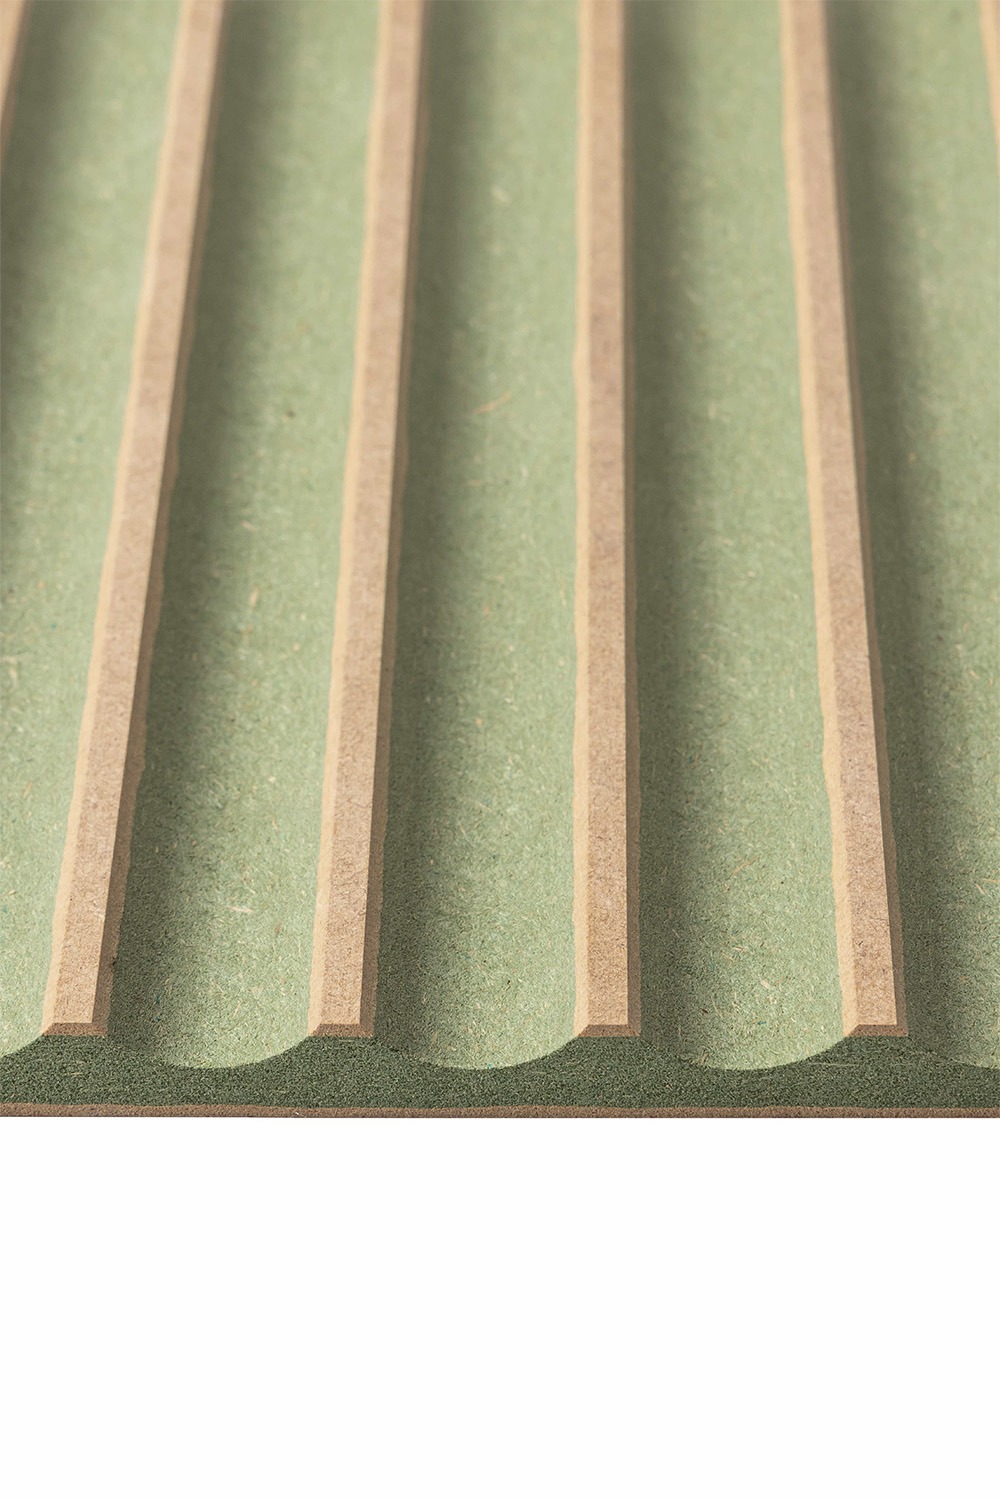 photo to show the features of an unprimed mdf fluted panel